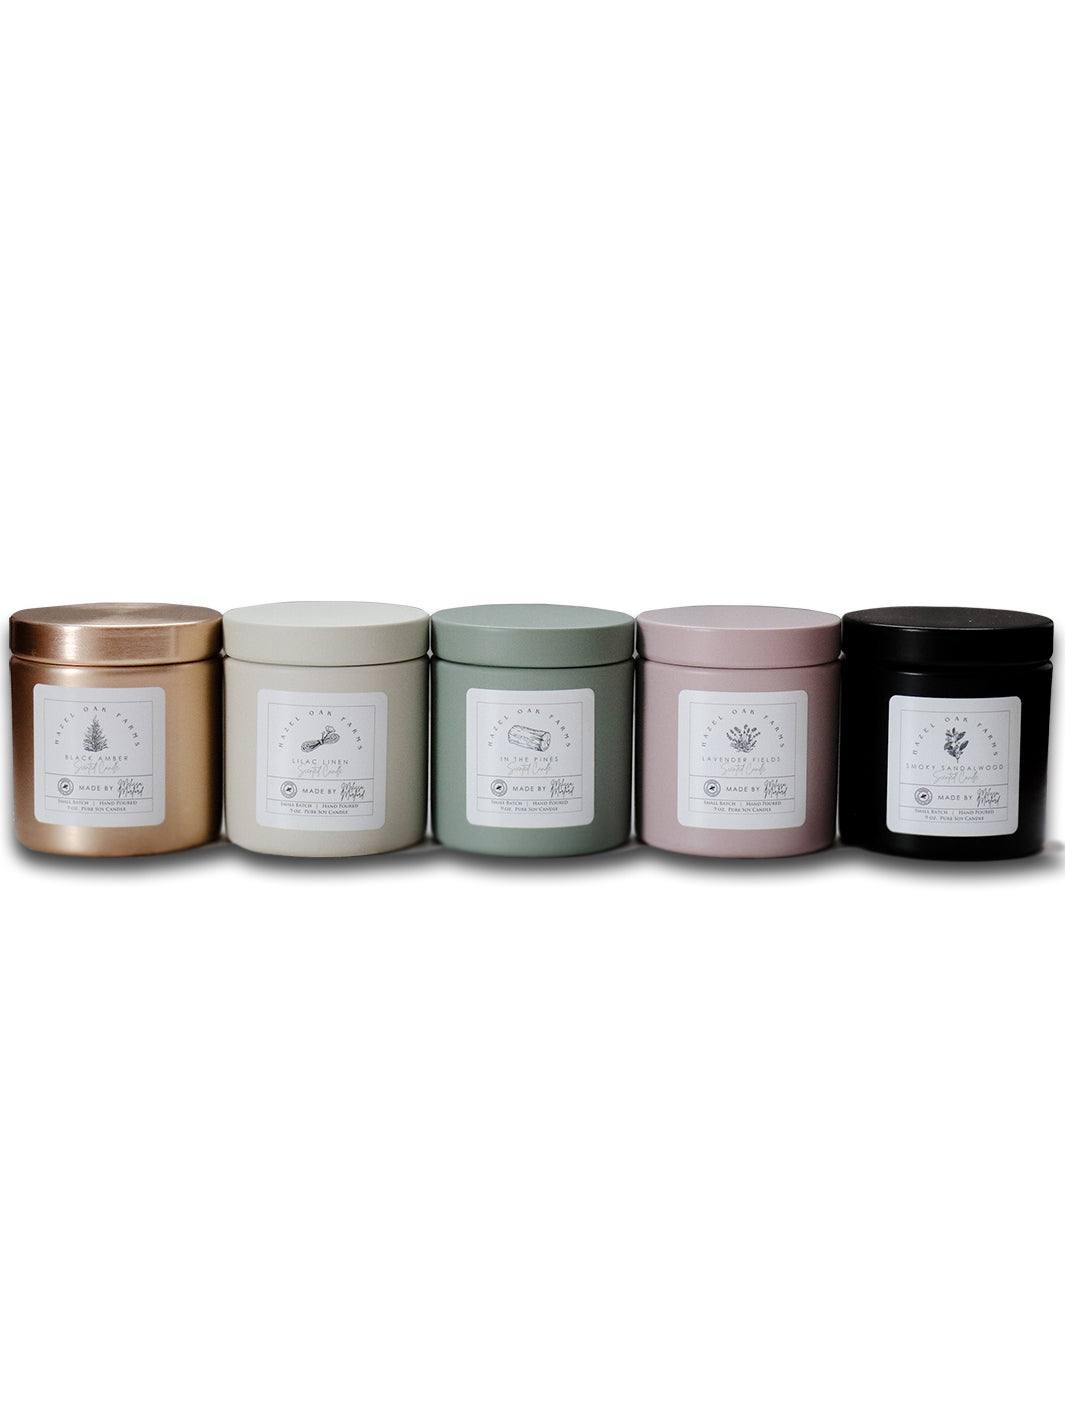 Melissa's Pure Soy Candles (in stock) Earthly Comfort Home Decor 1891-1